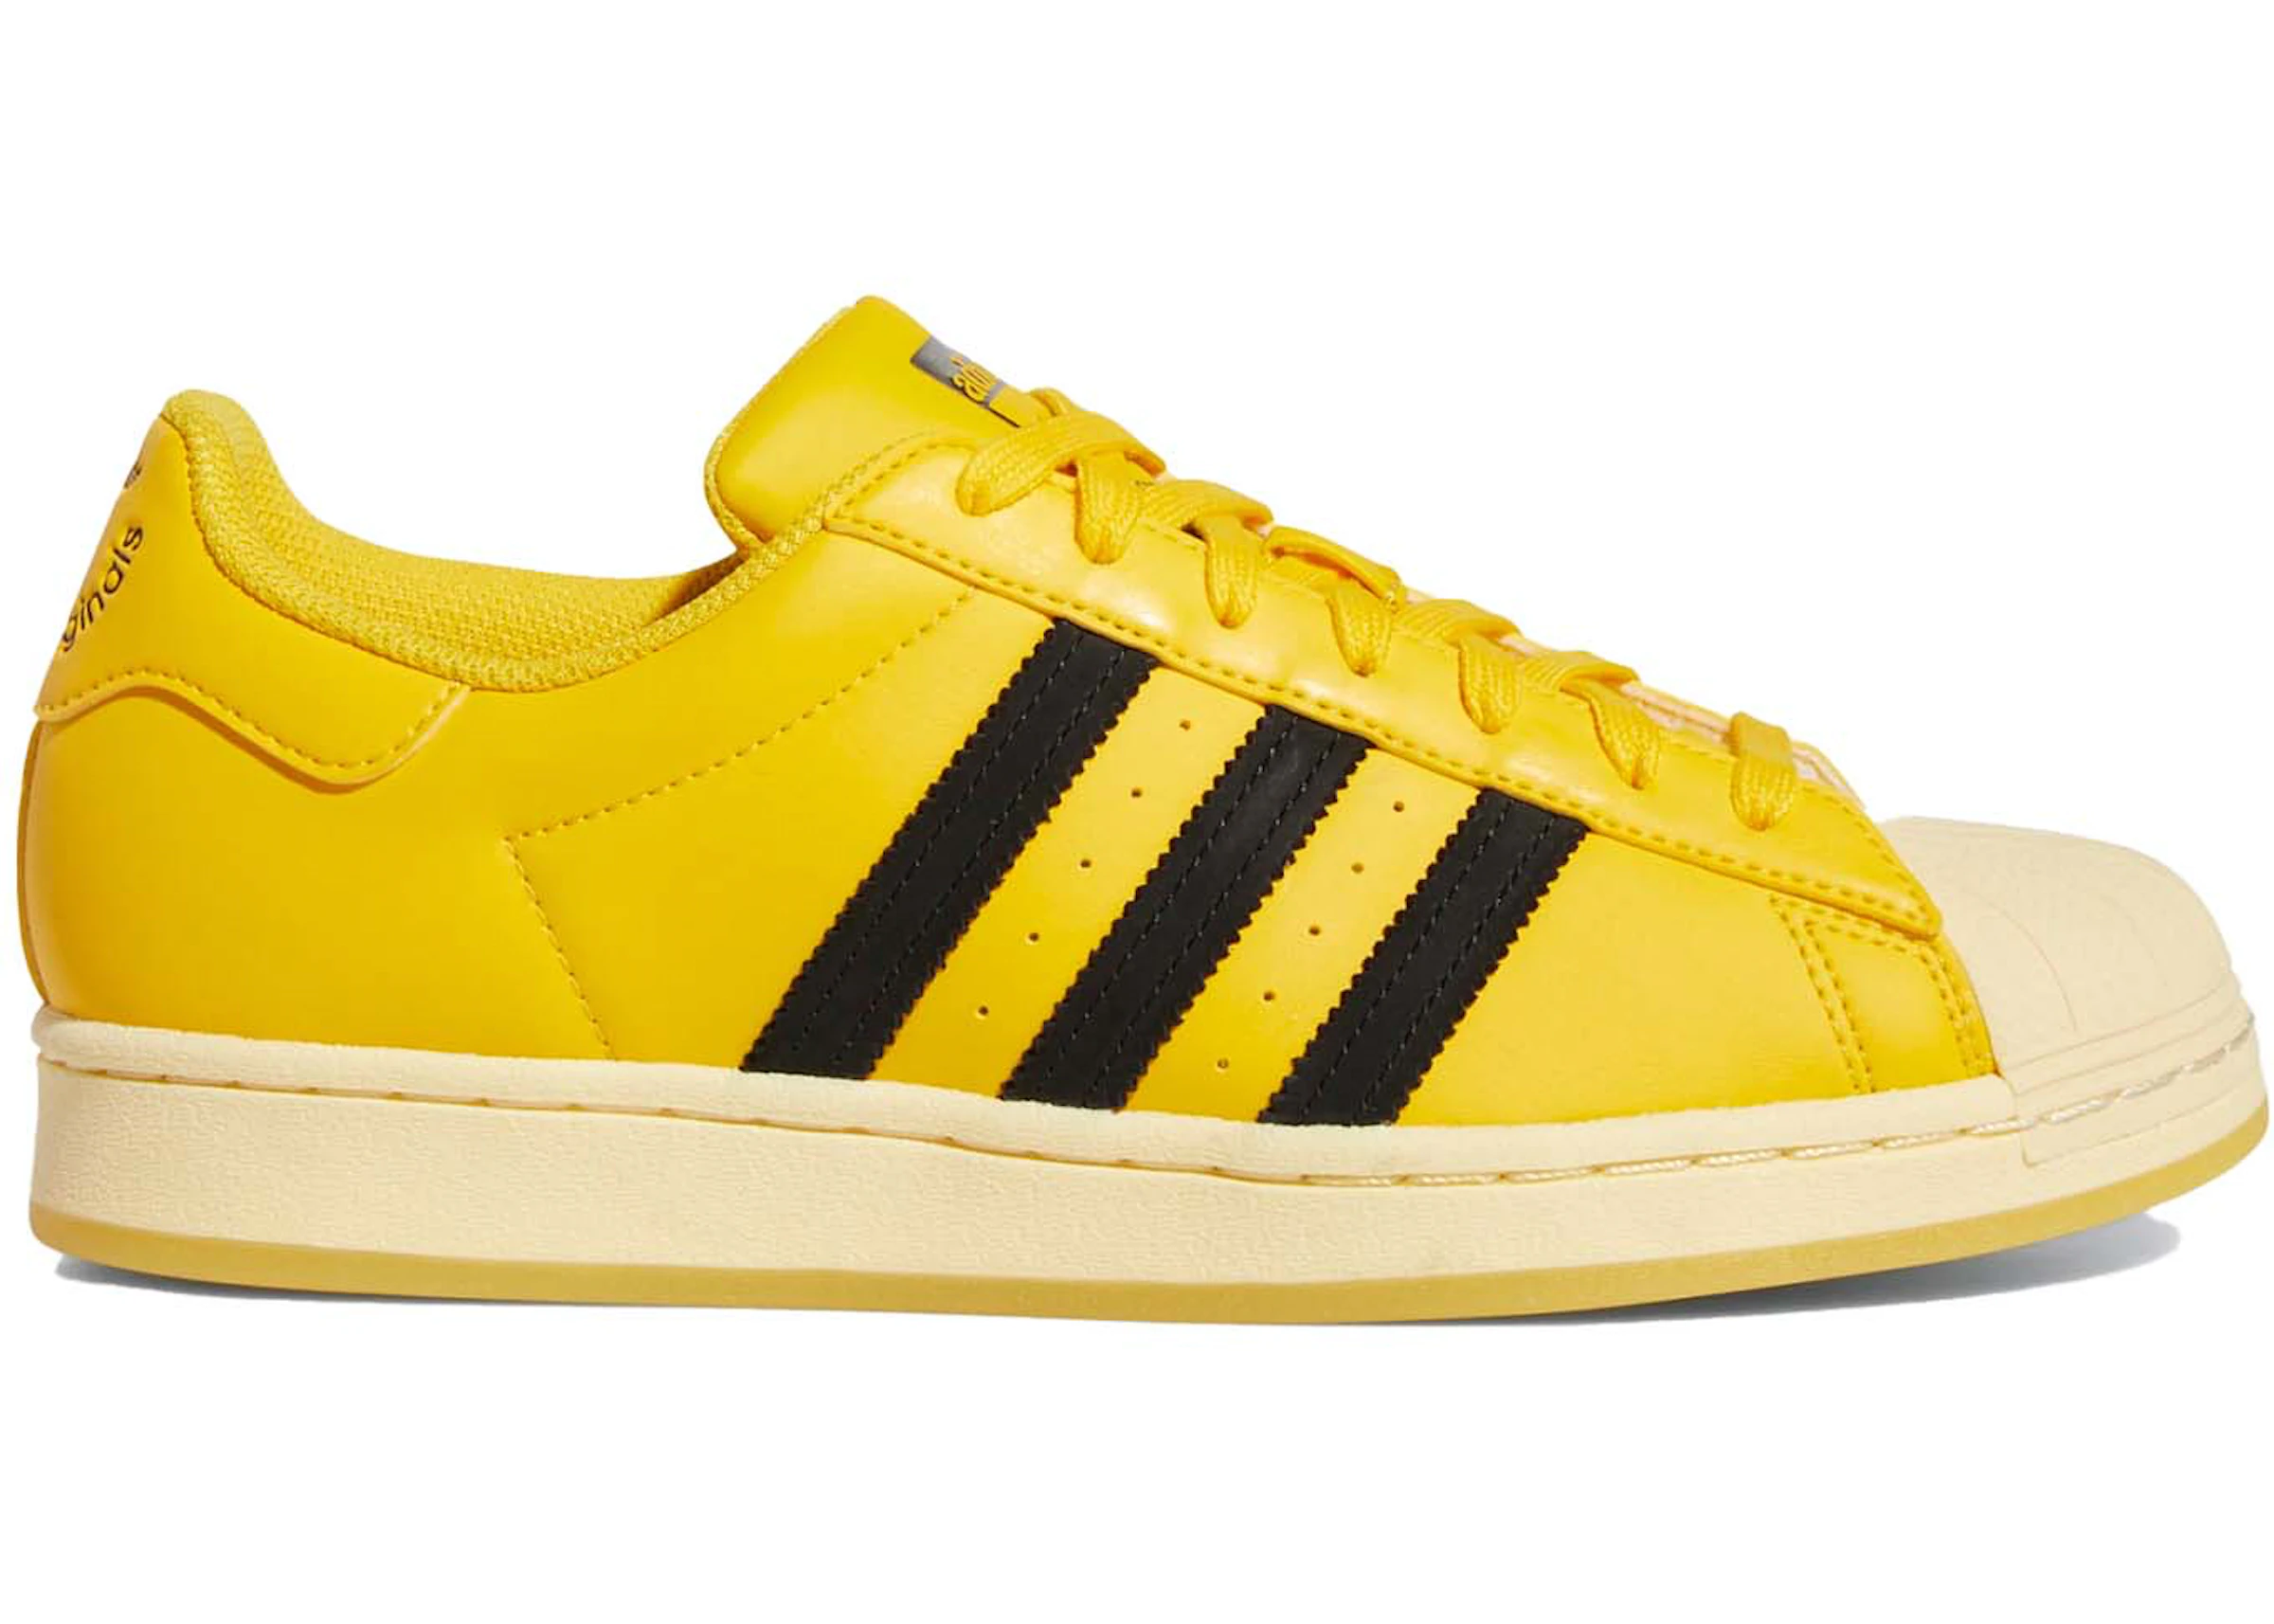 industry Wow For a day trip adidas Superstar Bold Gold Easy Yellow - GY2070 - US